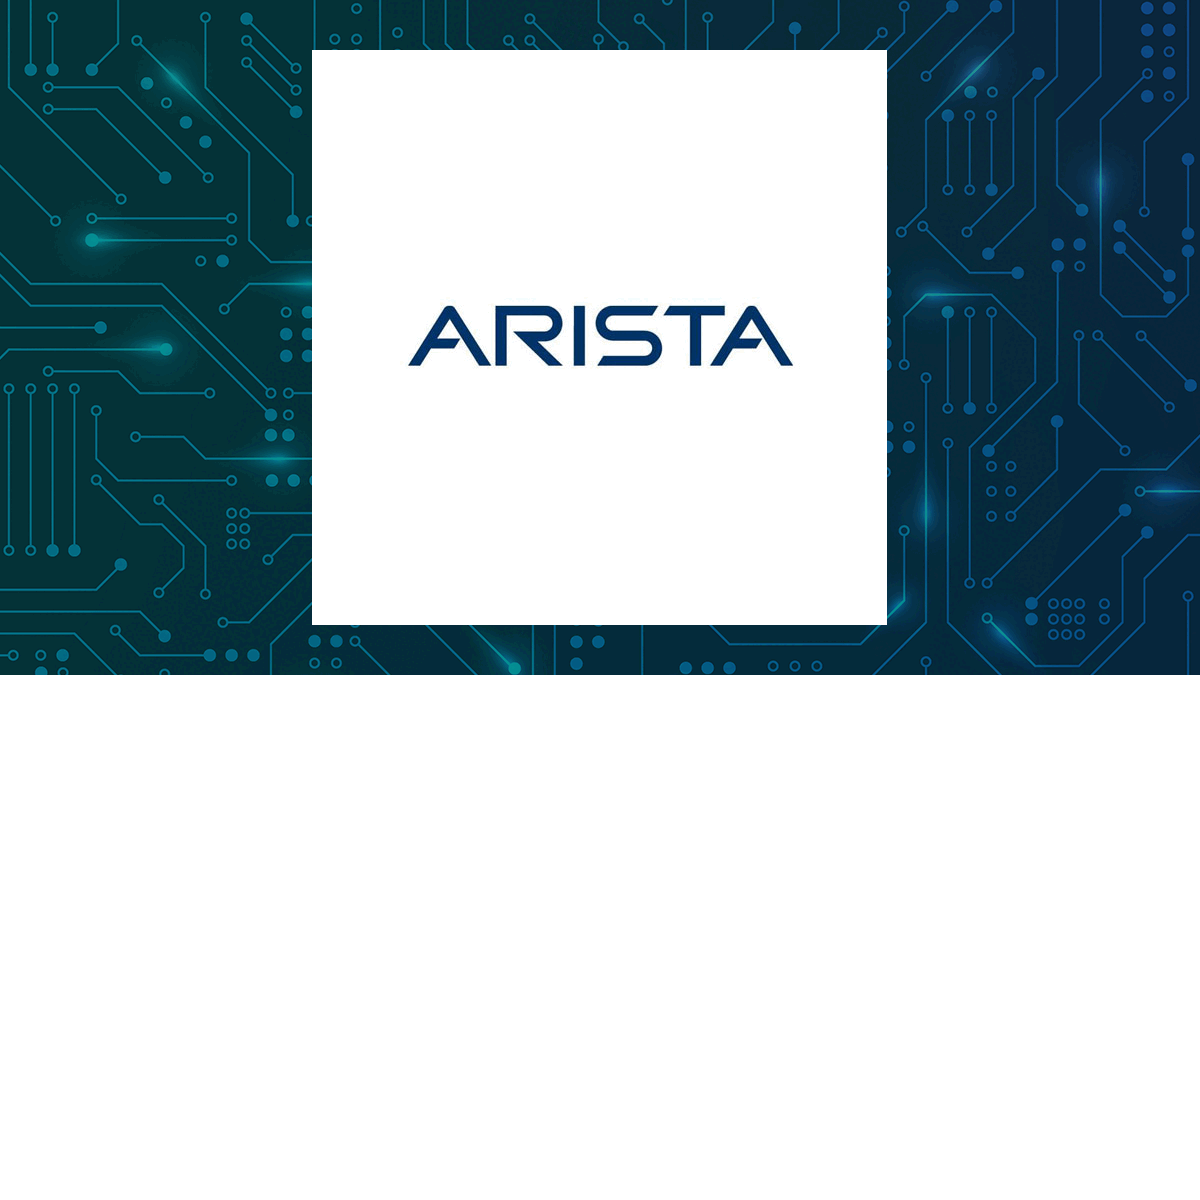 Arista Networks, Inc. (NYSE:ANET) Shares Acquired by International Assets Investment Management LLC